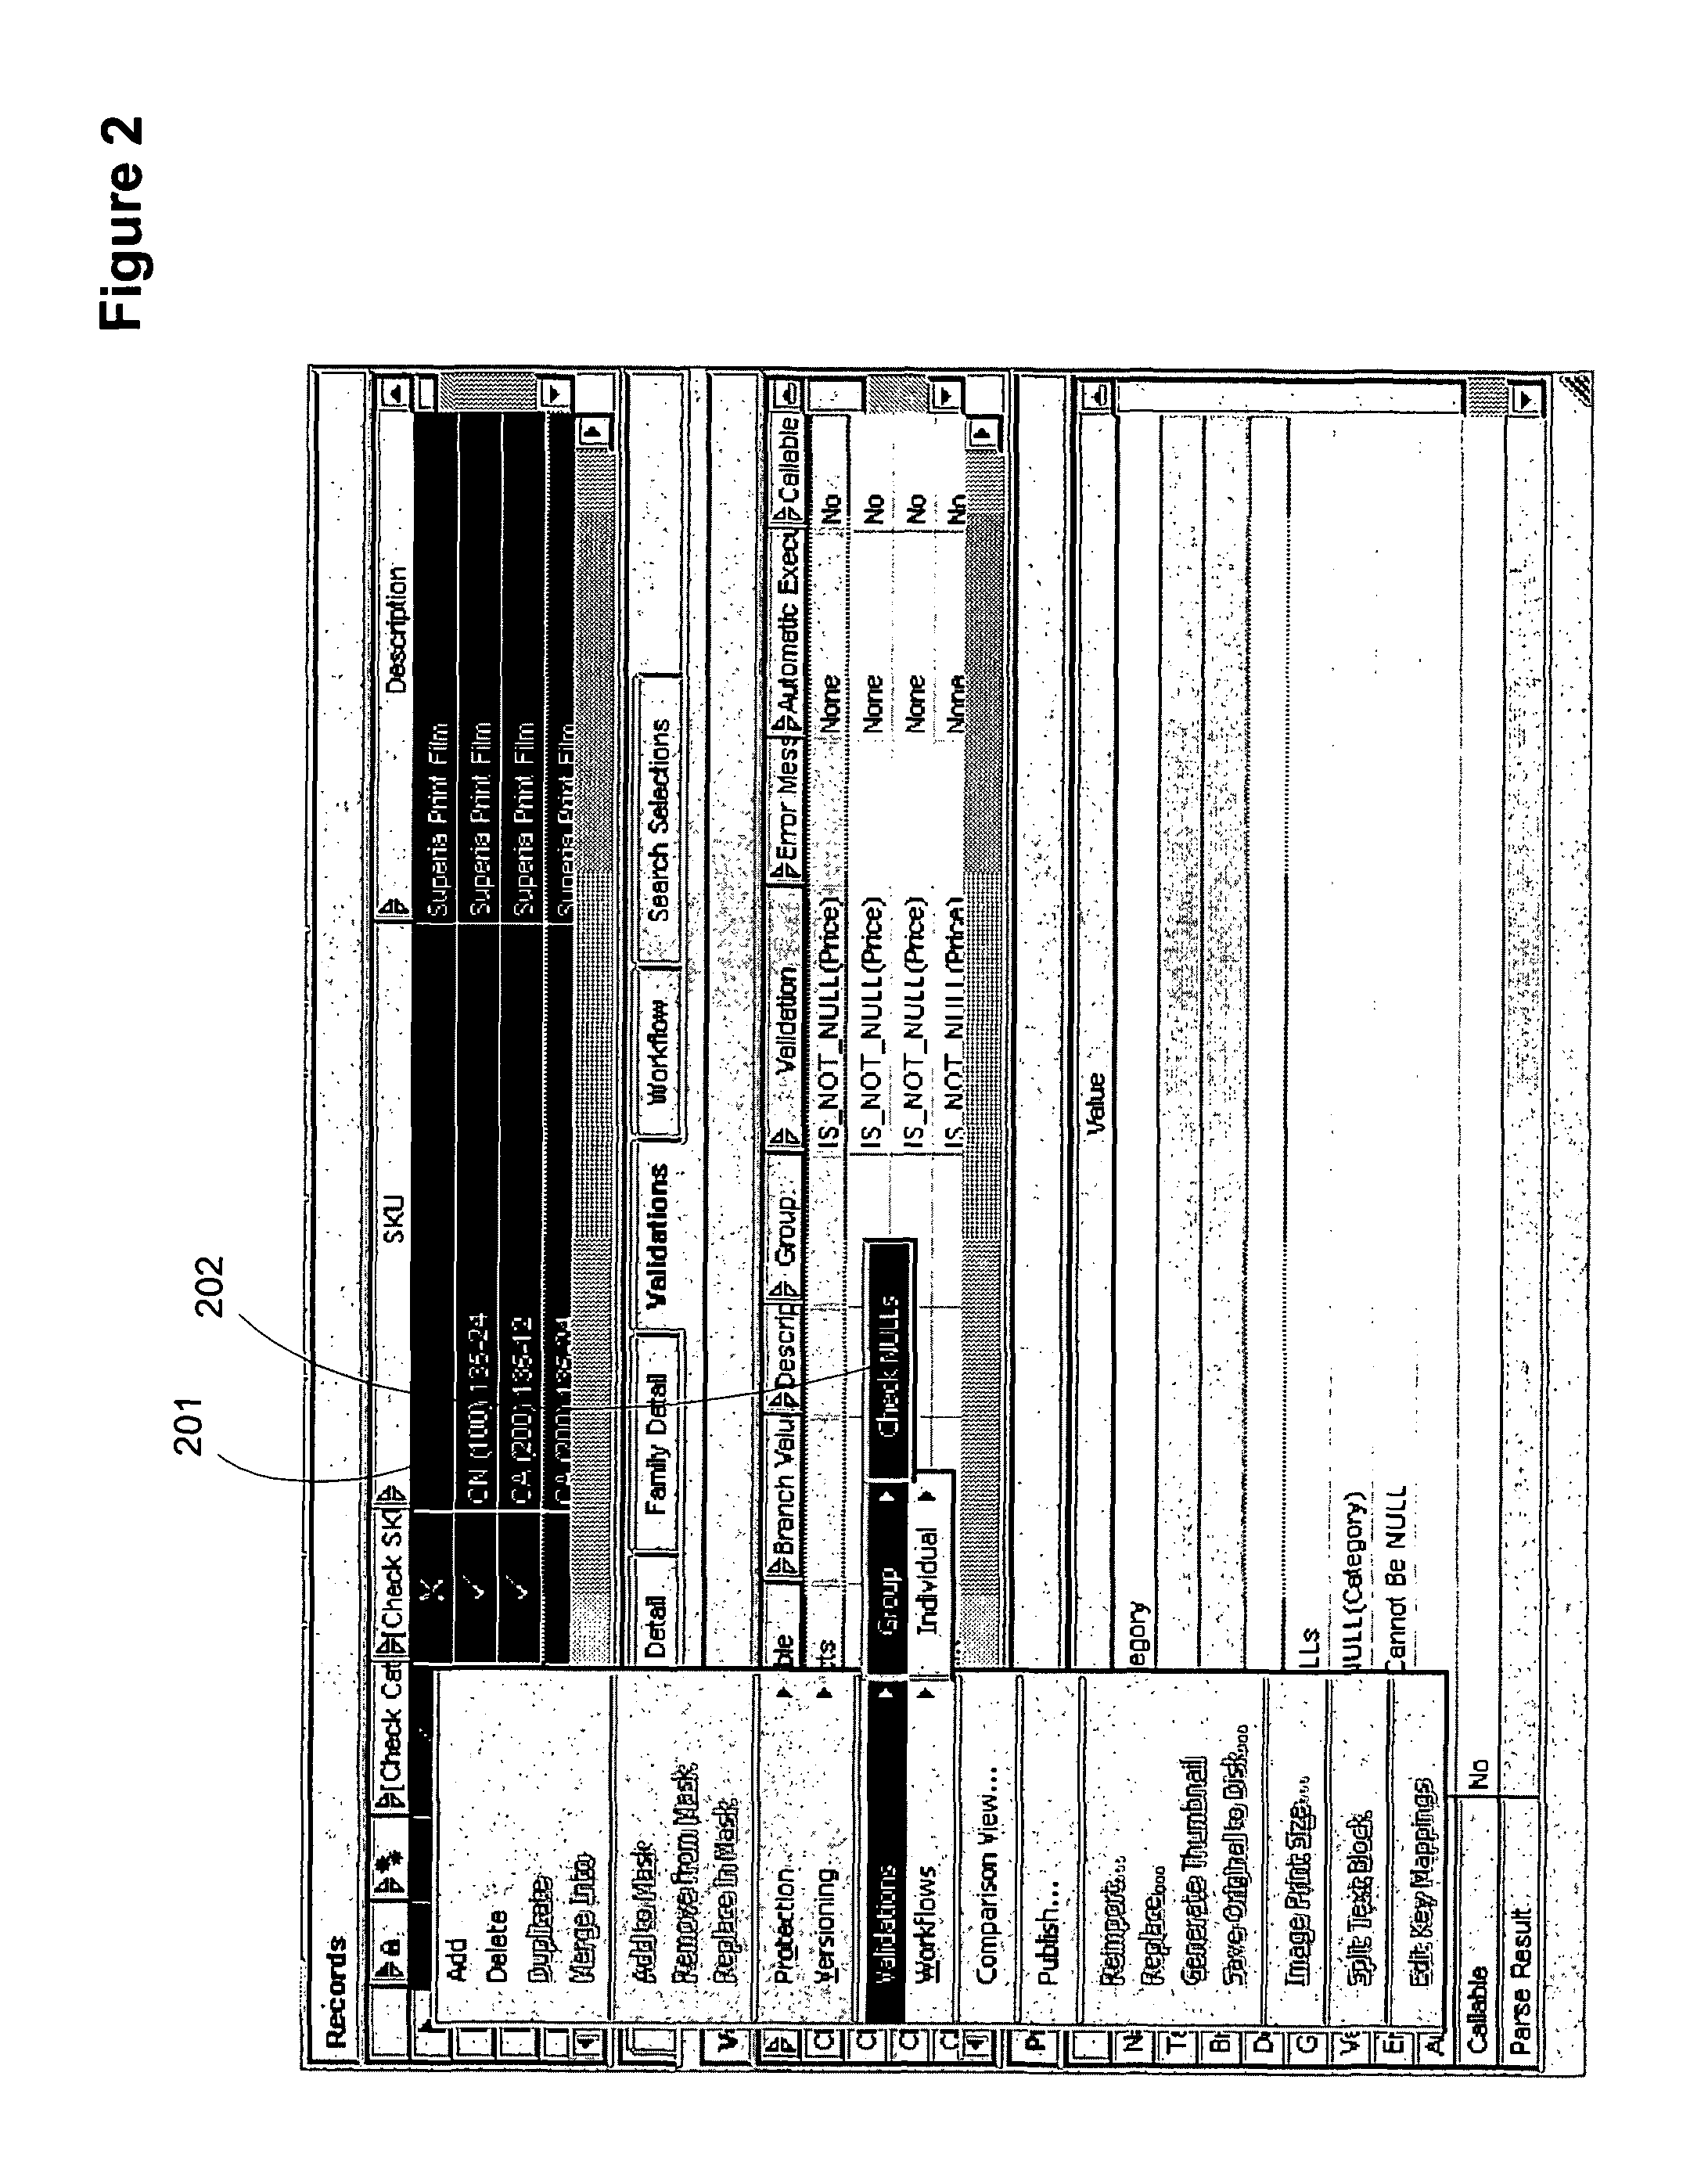 Method for improved processing of expression-based data